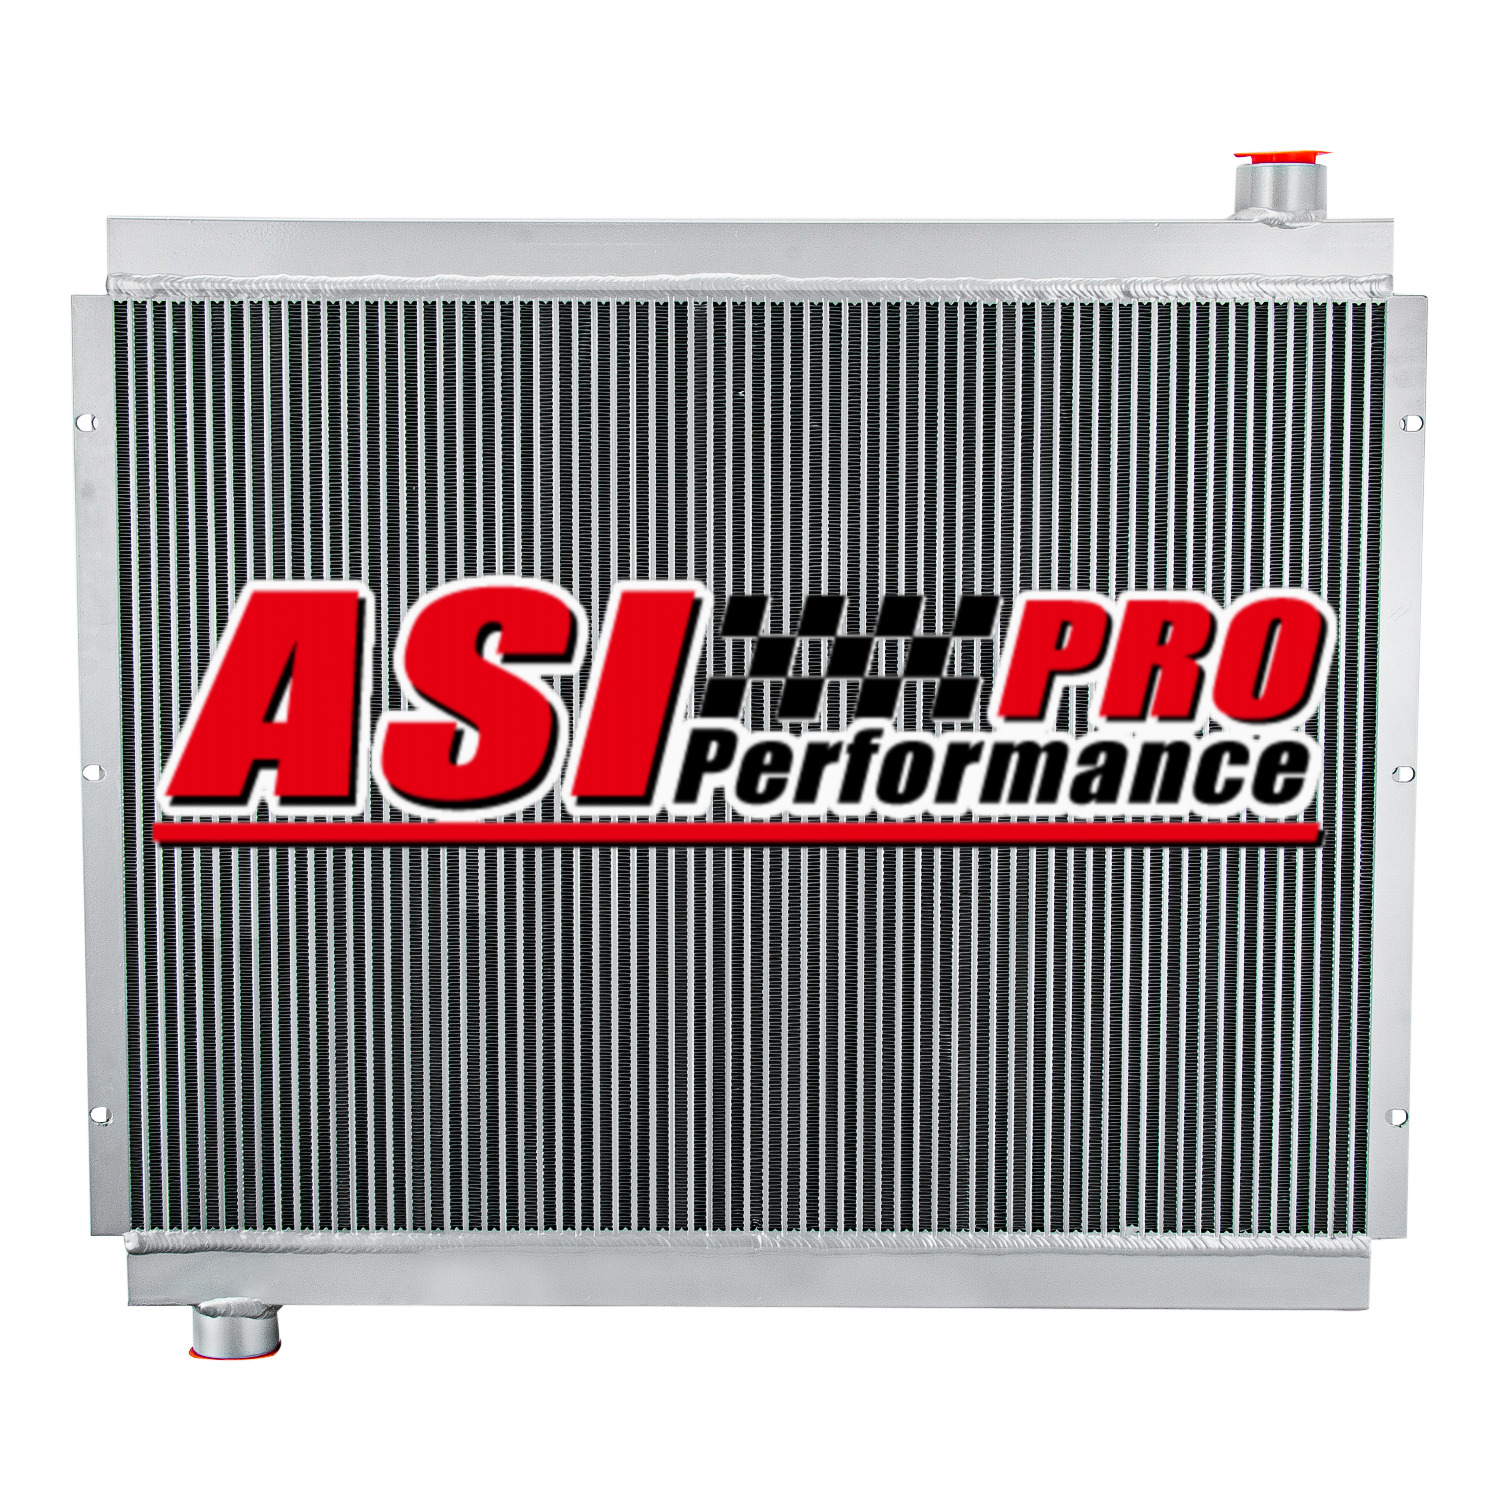 ASI Aluminum Hydraulic Oil Cooler 0-140GPM 155HP For Hydraulic System